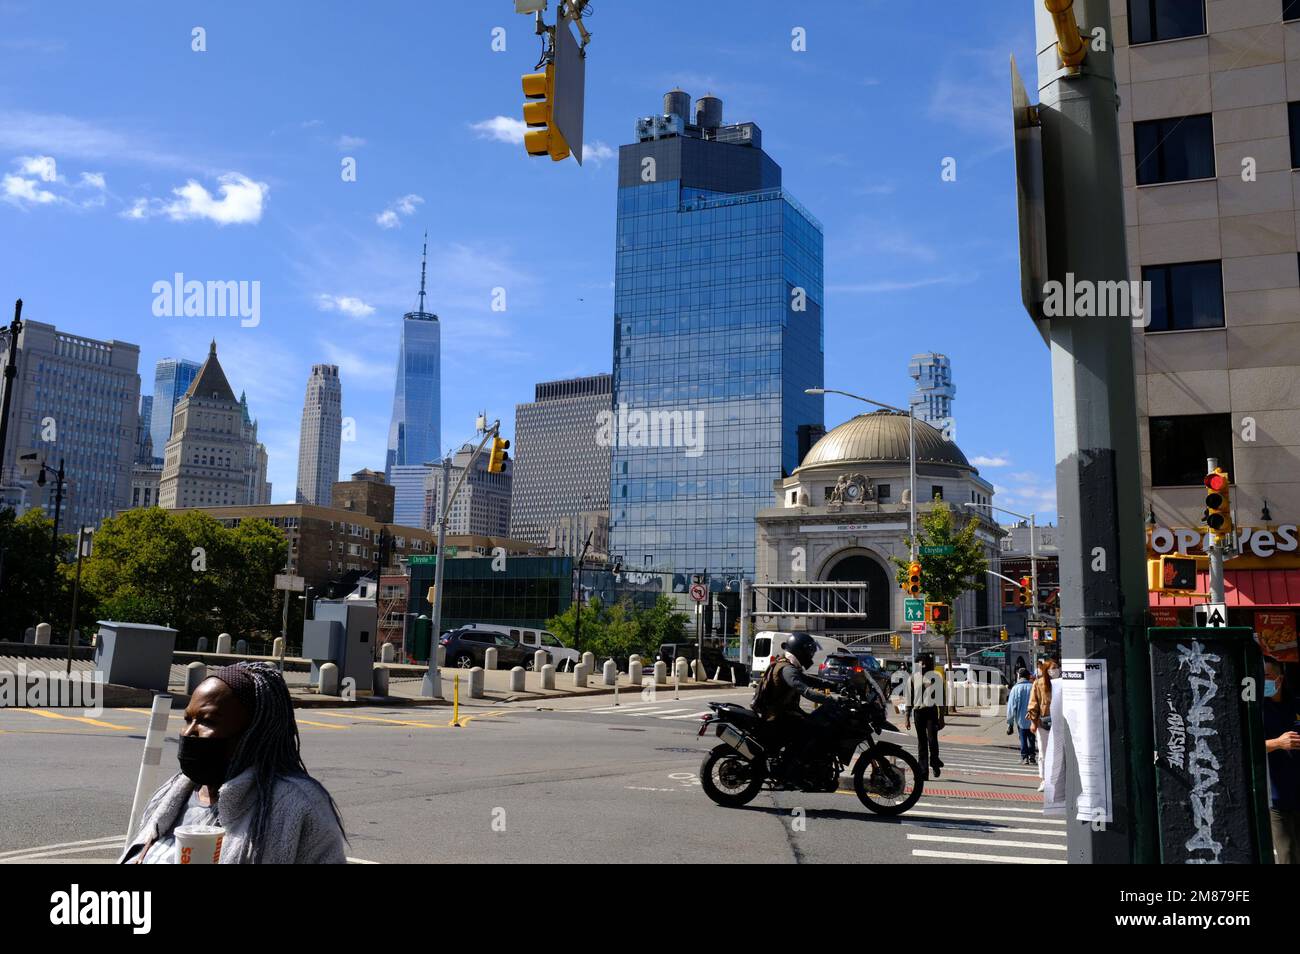 Canal street and Bowery street intersection with the domed HSBC Bank building, Hotel 50 Bowery and One World Trade Center and other buildings in Lower Manhattan in the background.New York City.USA Stock Photo